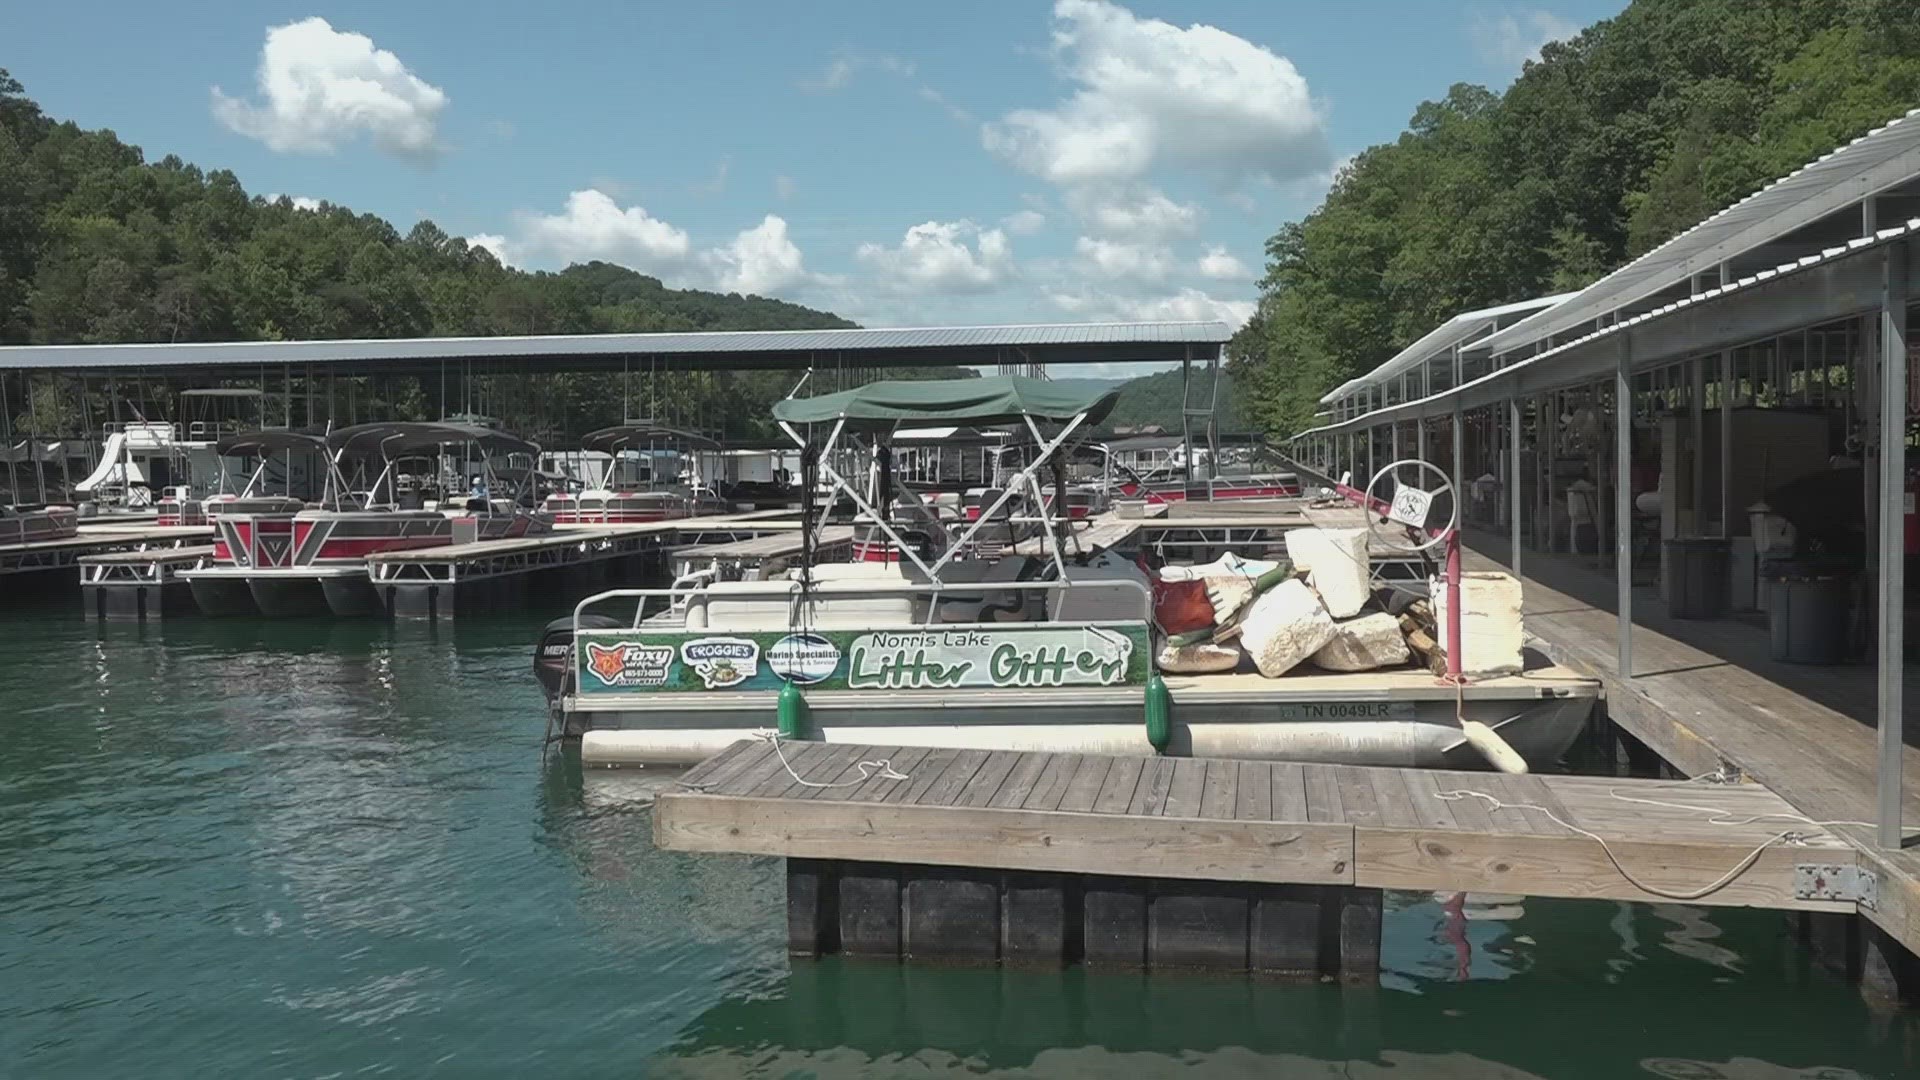 Down the road from downtown LaFollette is Norris Lake and the locals are putting in the effort to clean it.